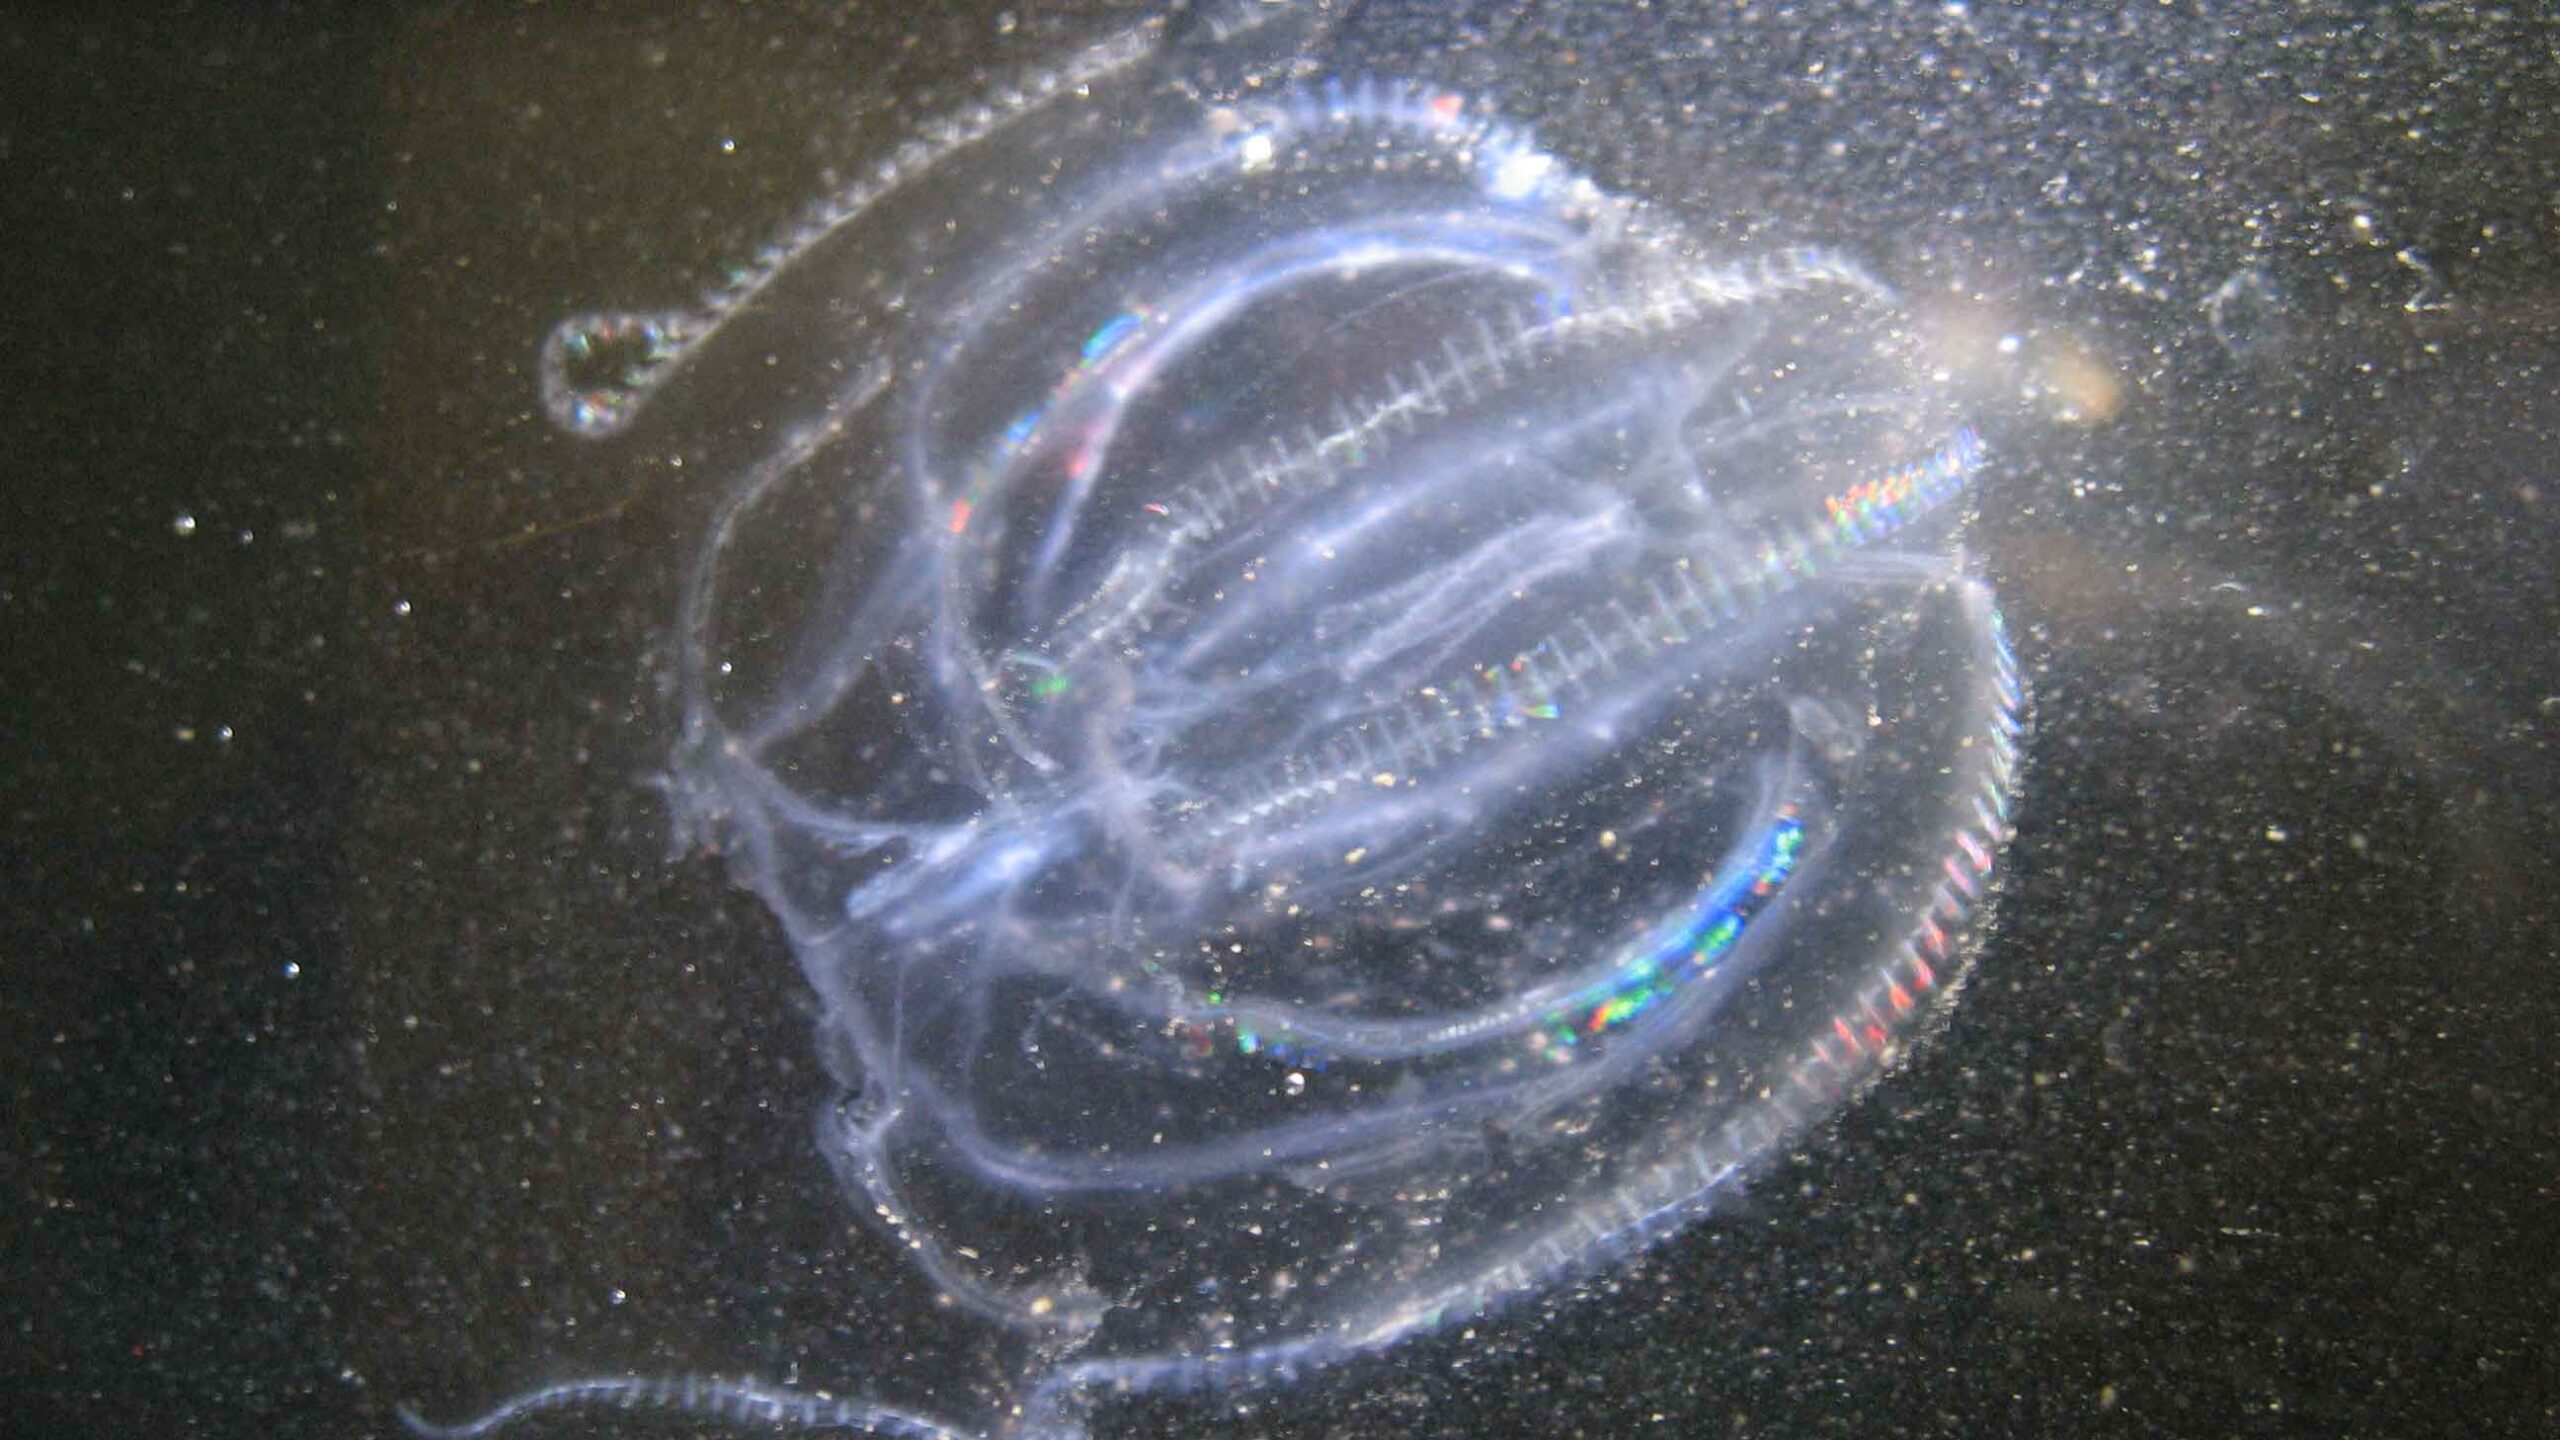 Comb Jellyfish white long rounded legs cupped in an oval shape